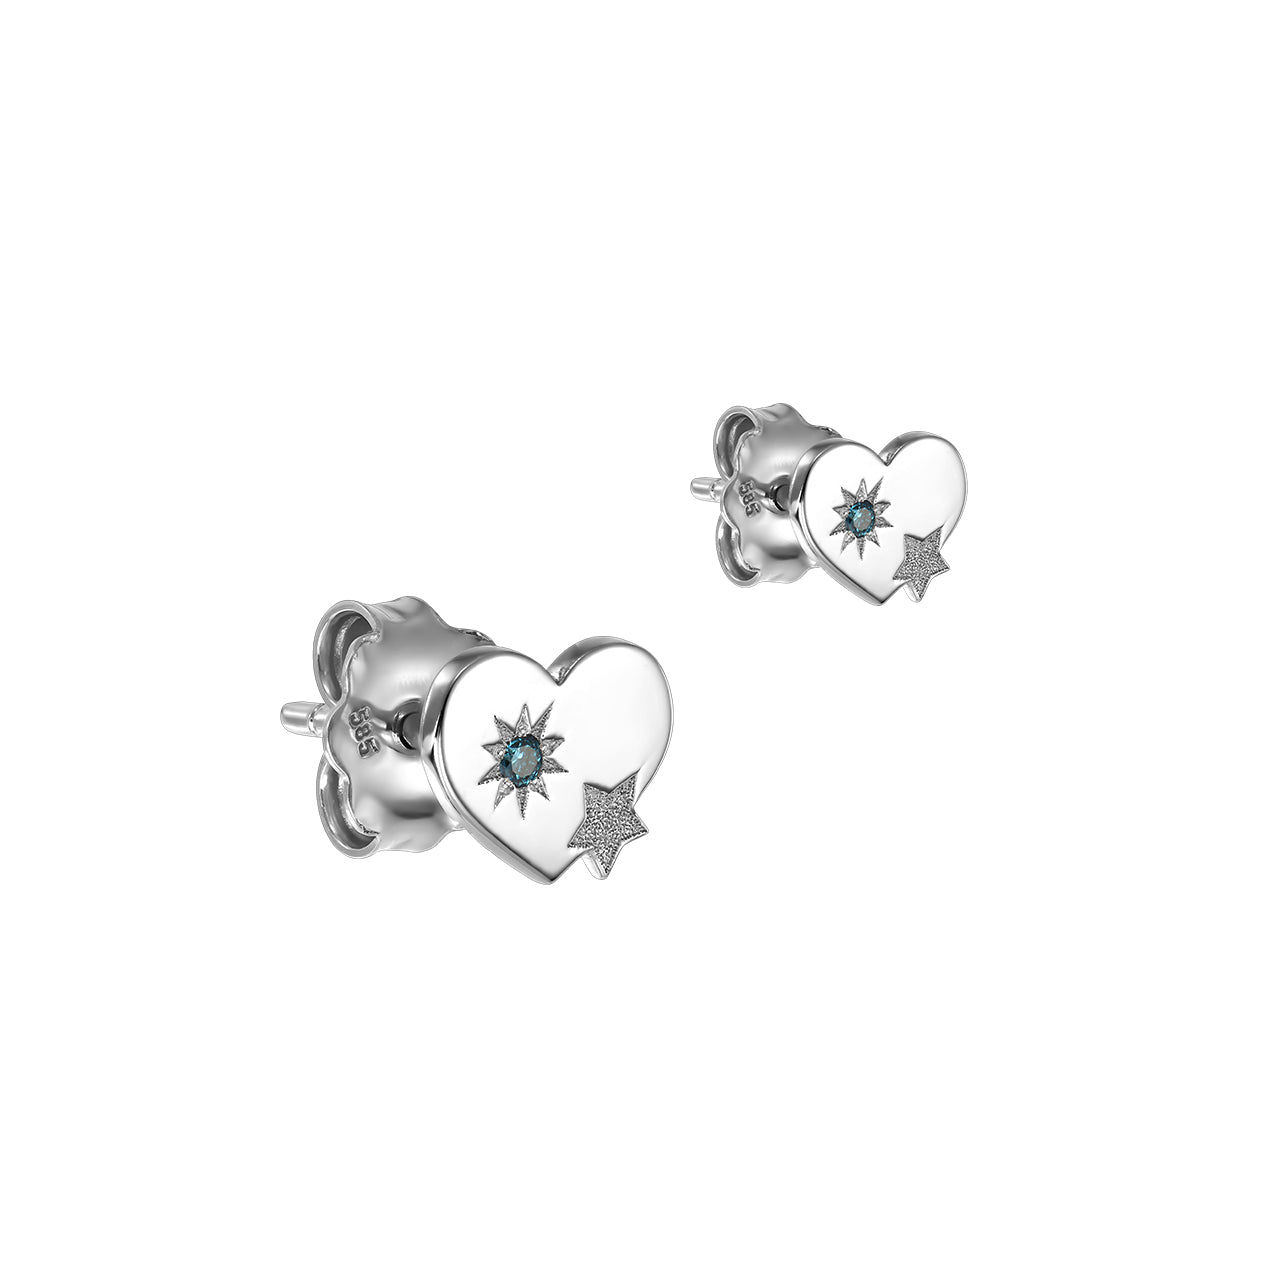 Stud Earrings Hearts with Stars with blue diamons, in white gold - zeaetsia